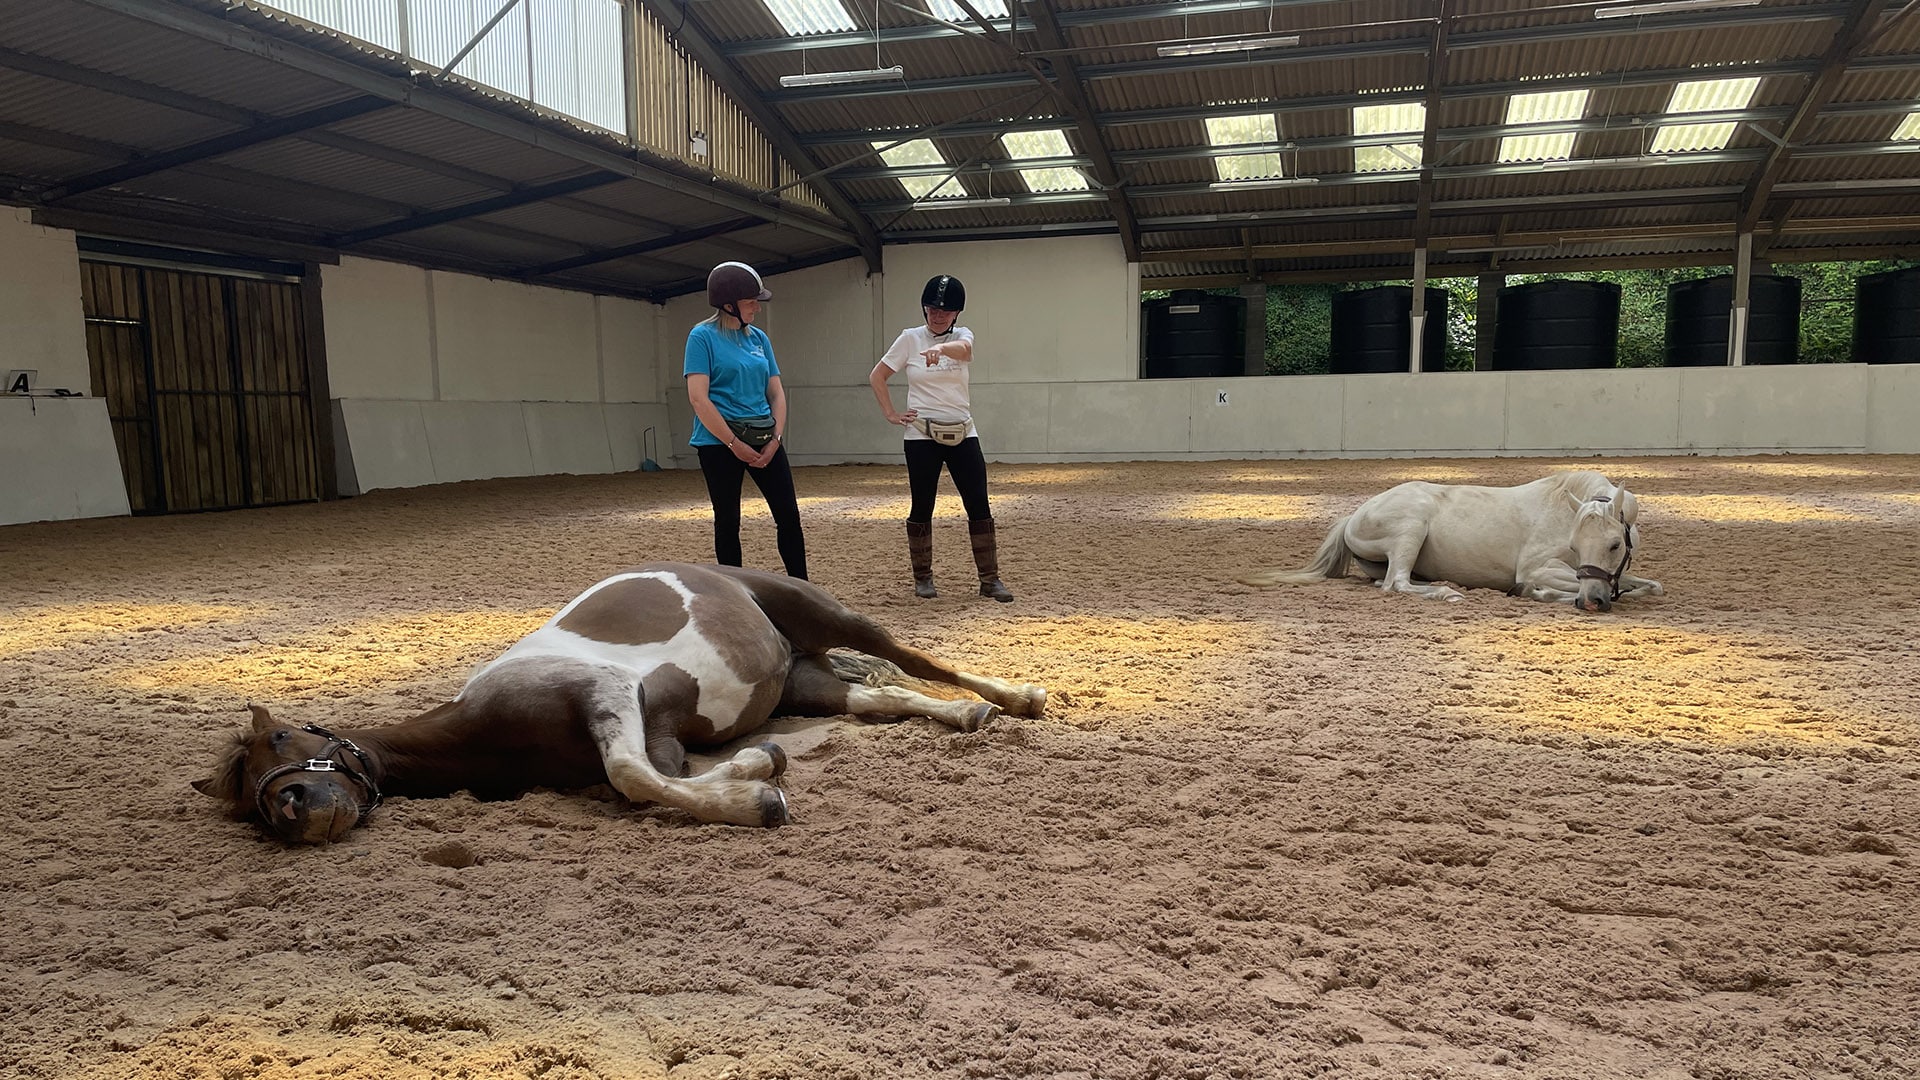 Two horses lounging on the floor with sanctuary workers behind them